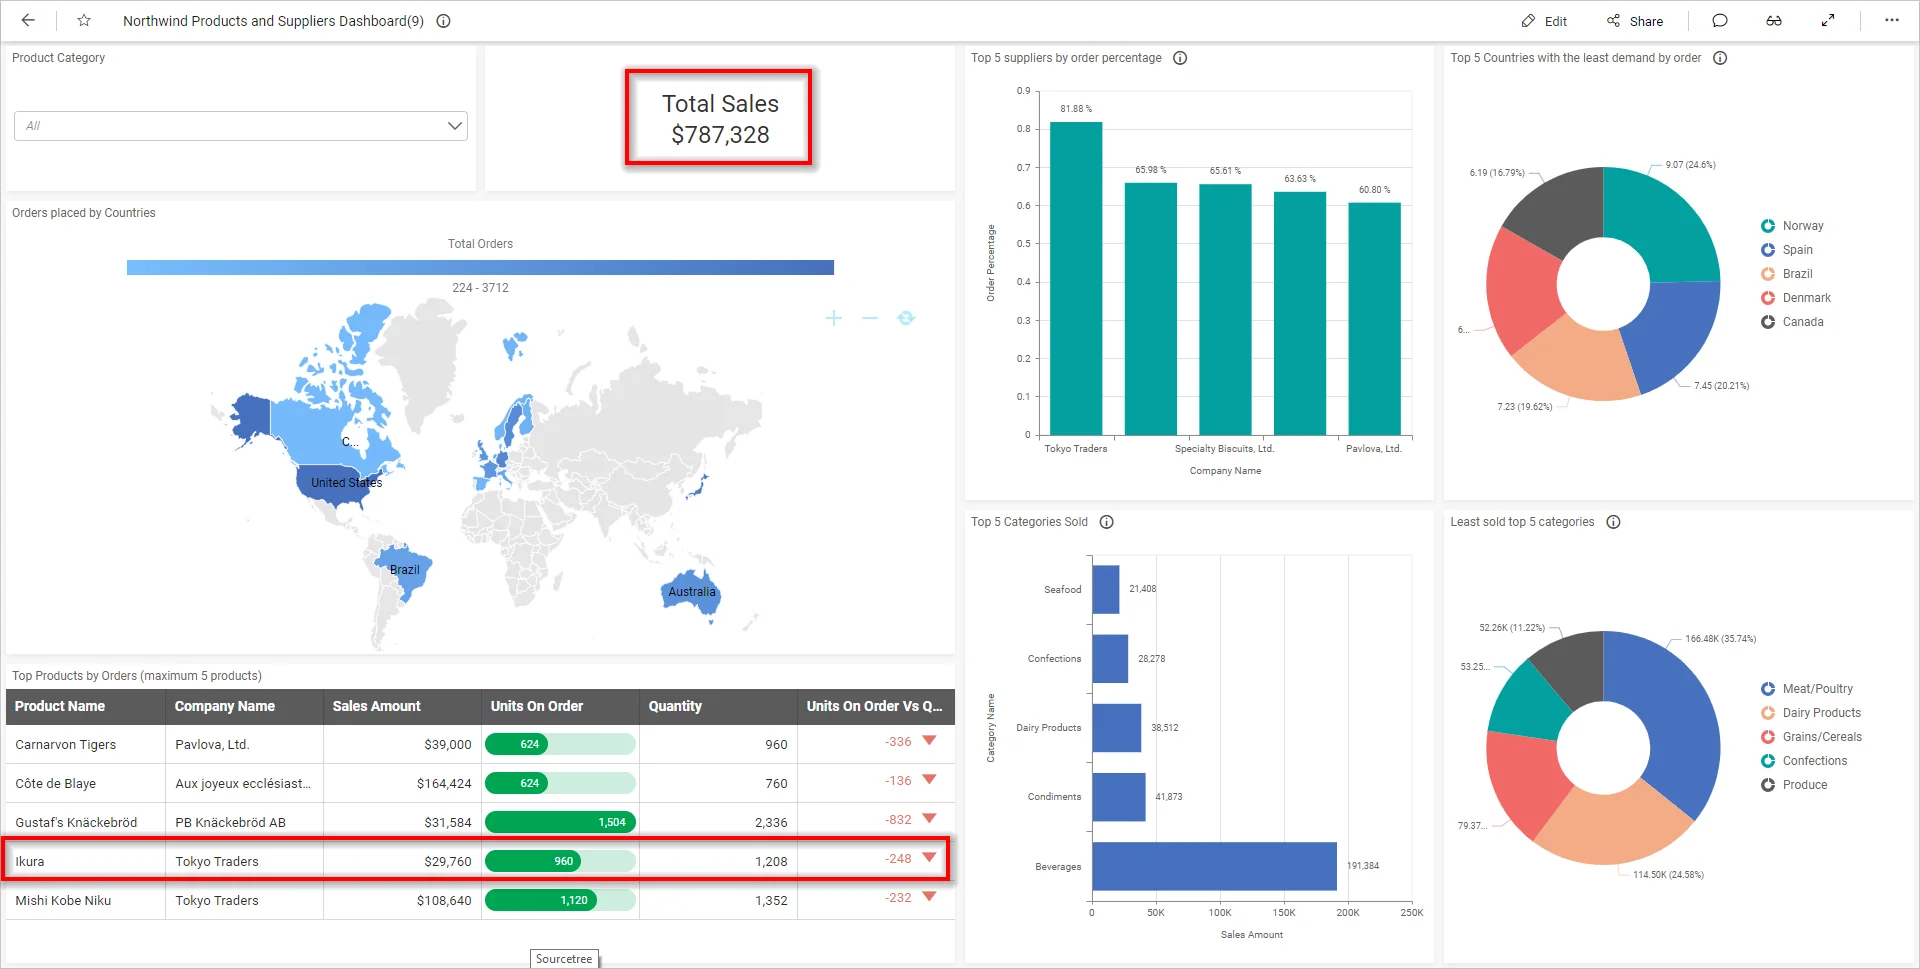 Updated data in Northwind Products and Suppliers analysis dashboard